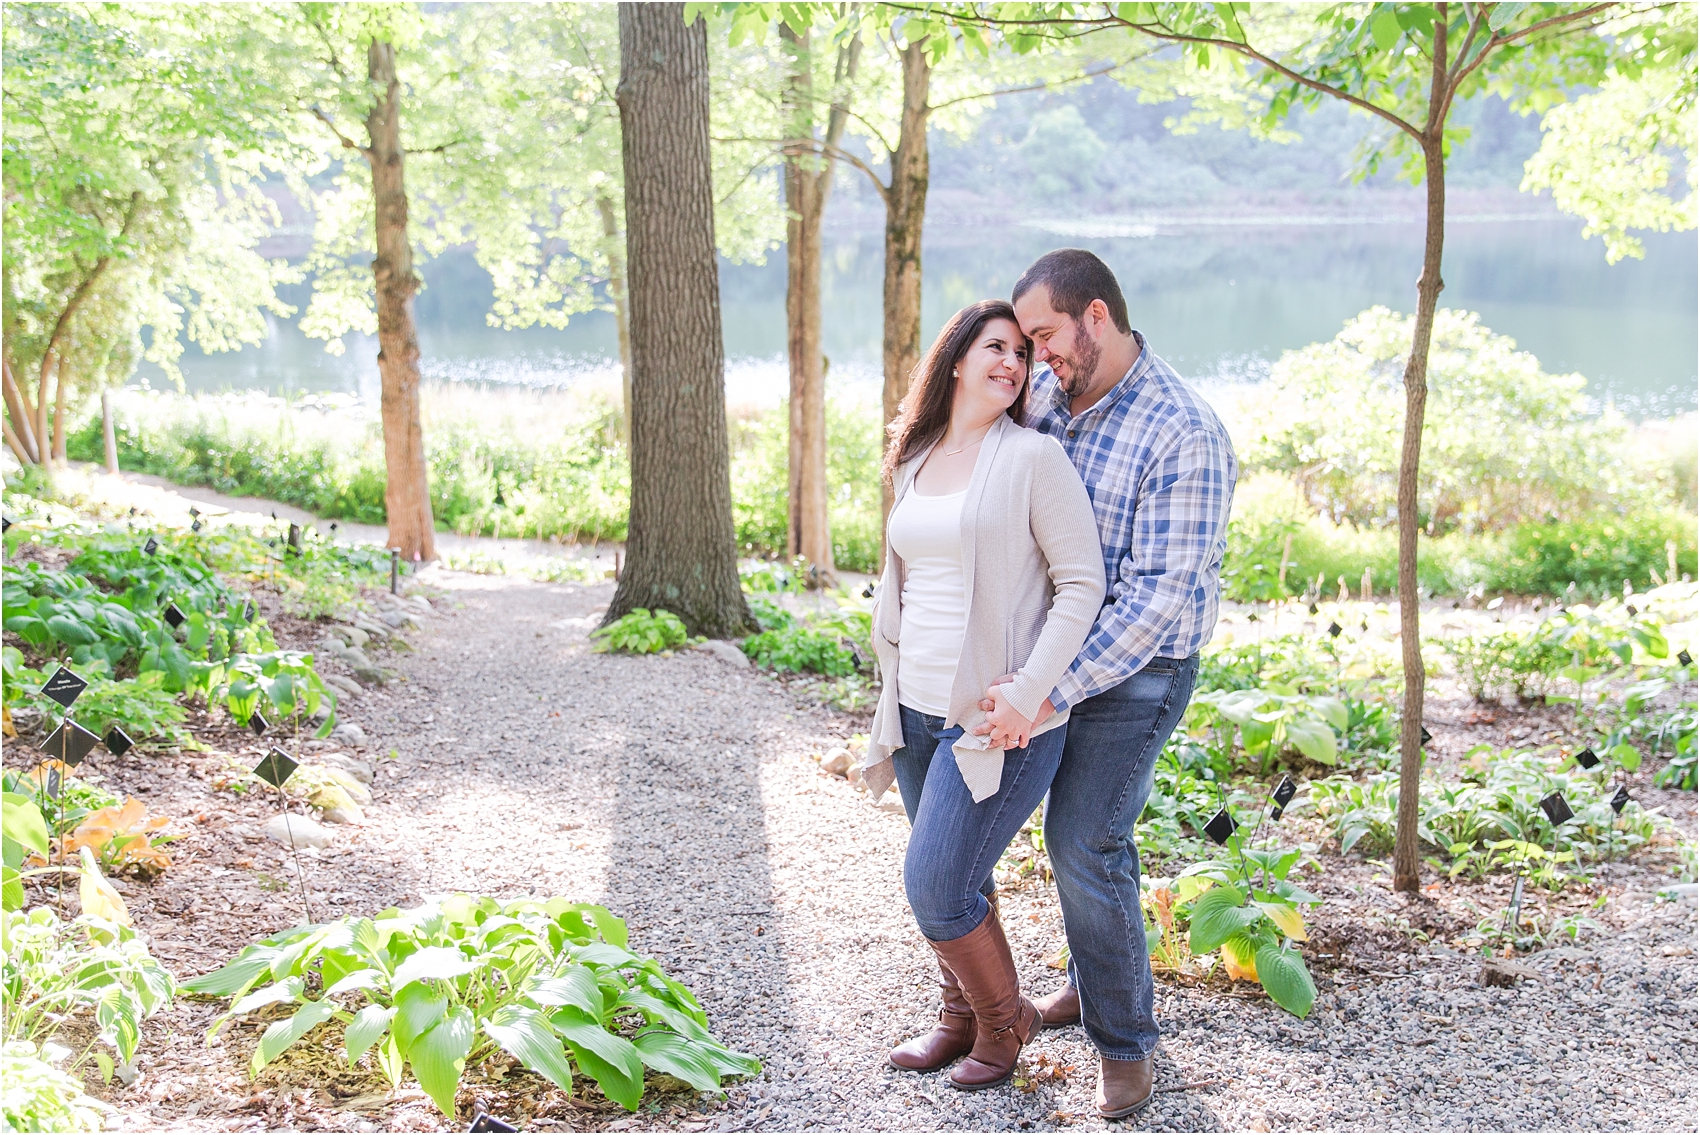 candid-romantic-summer-engagement-photos-at-hidden-lake-gardens-and-black-fire-winery-in-tipton-mi-by-courtney-carolyn-photography_0027.jpg